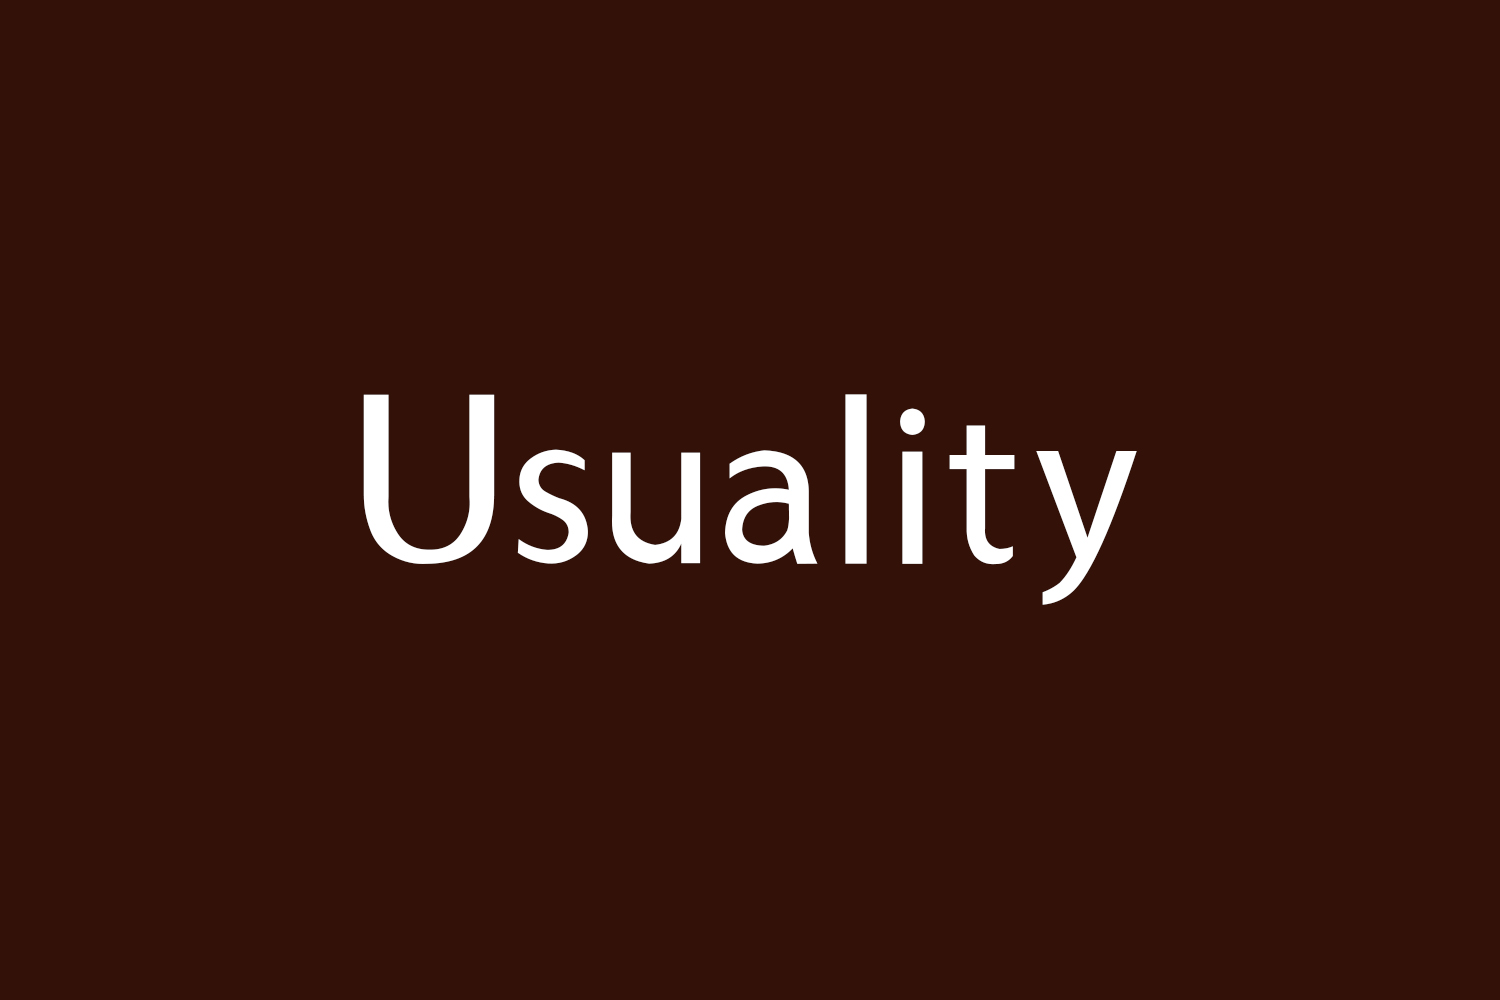 Usuality Free Font